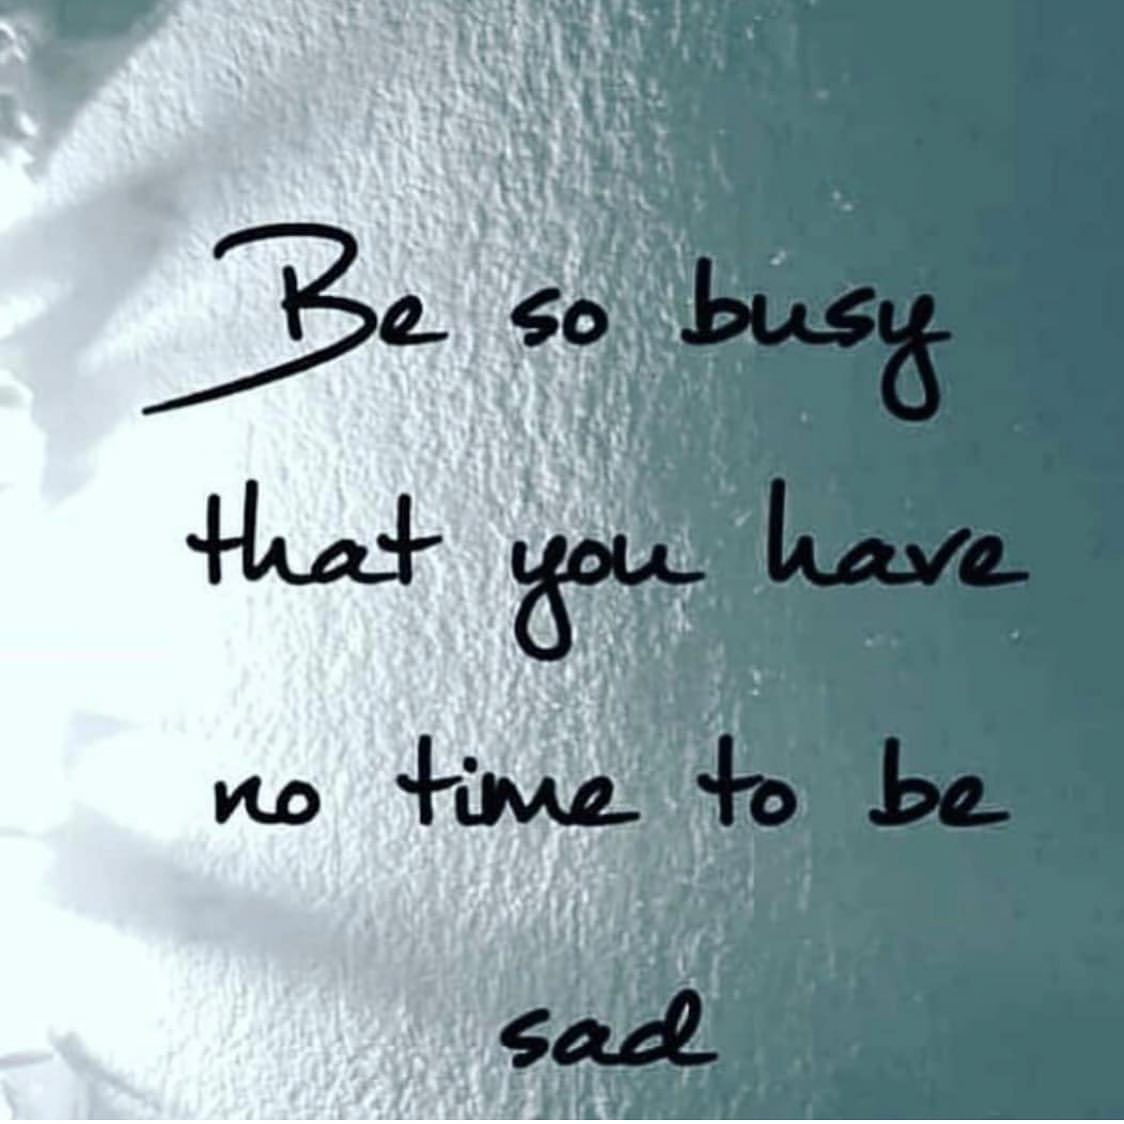 Be so busy that you have no time to be sad.